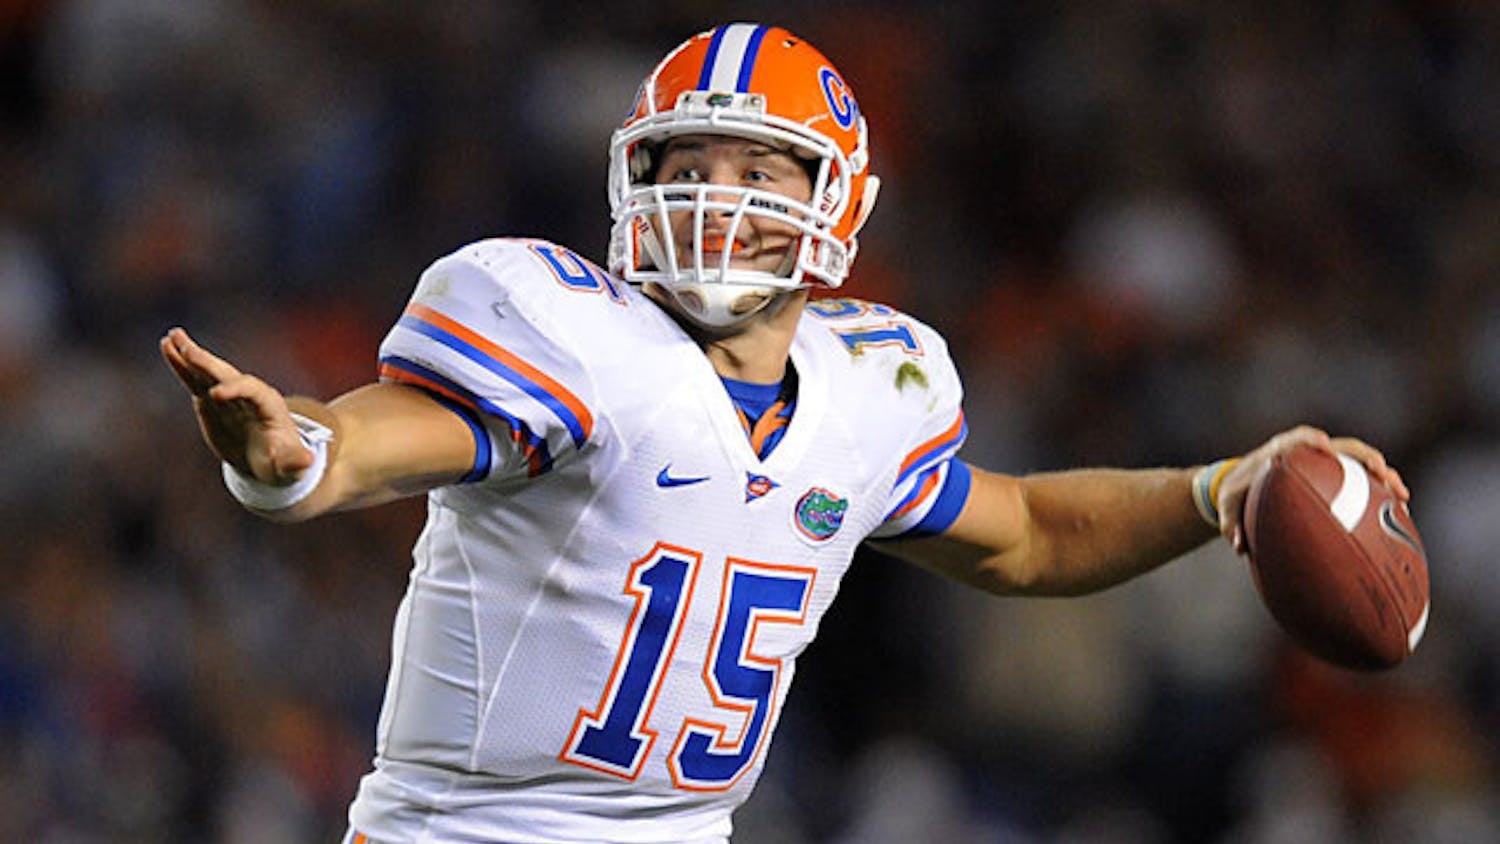 Florida quarterback Tim Tebow and the 2009 Gators are the last team to carry a No. 1 ranking into Jacksonville on either side of the rivalry, but 2021 Georgia will finally break the streak.